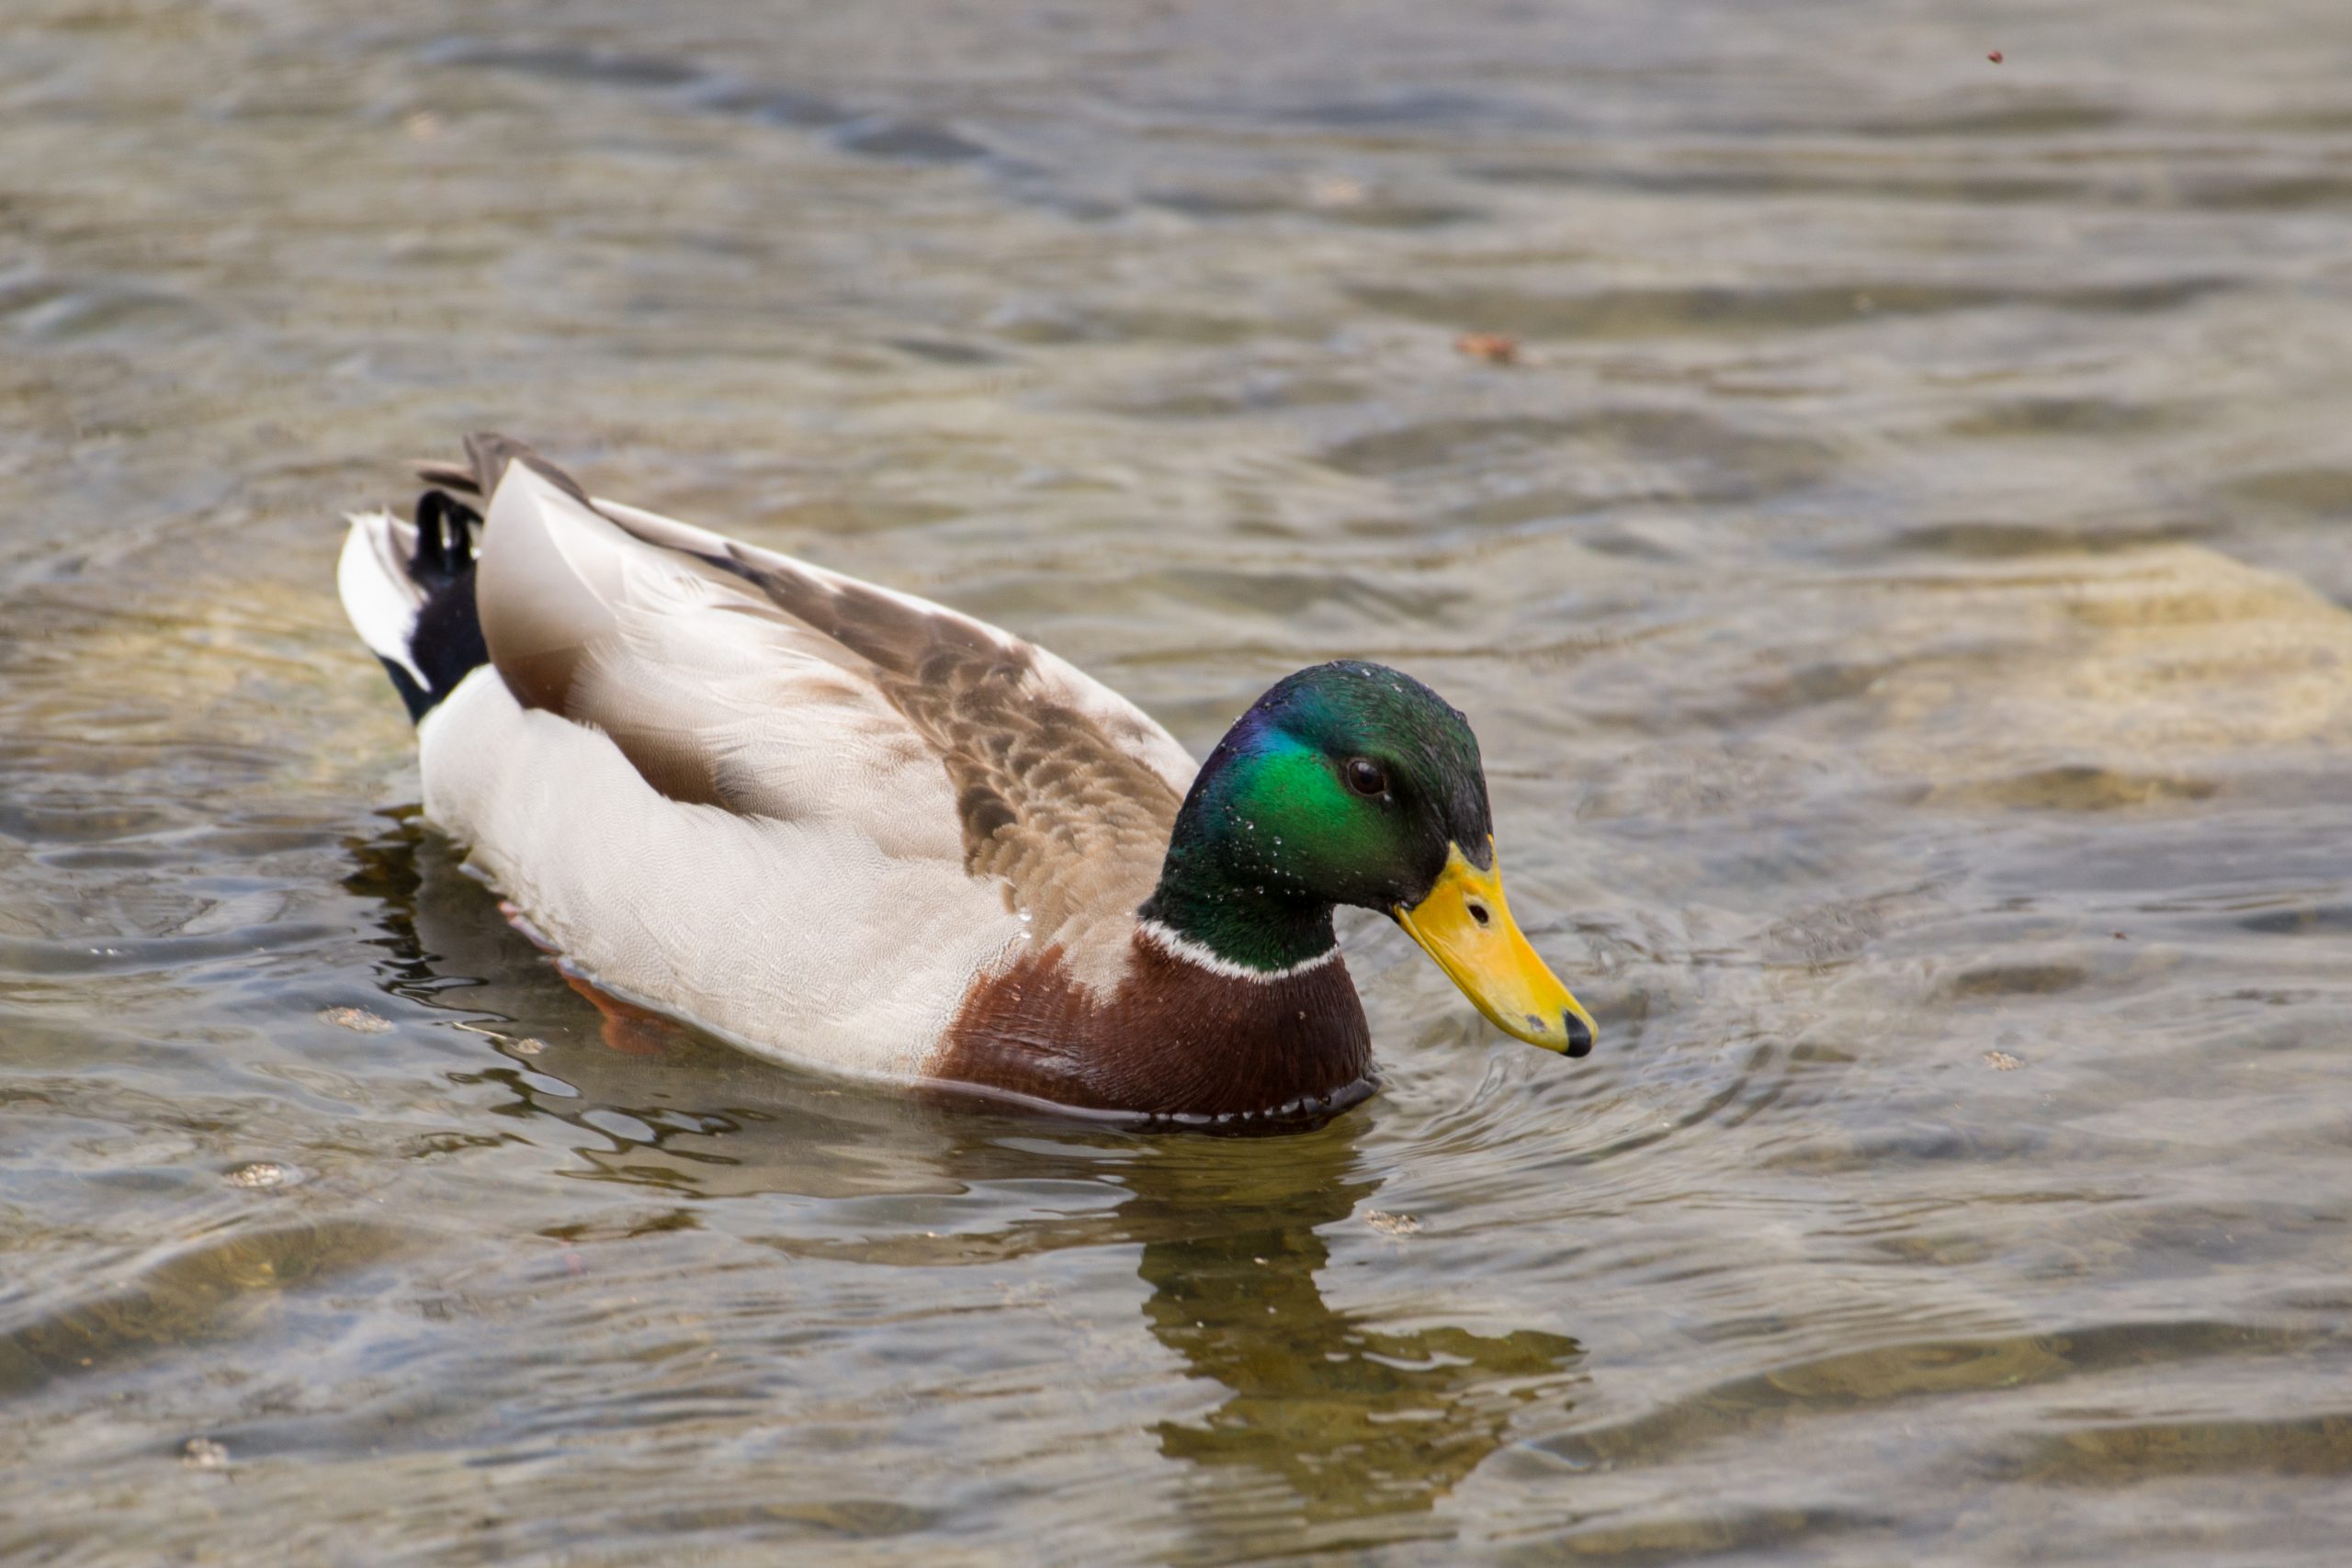 Male mallard swimming in Amos Waites Park. It has a brown breast and green head with yellow bill.